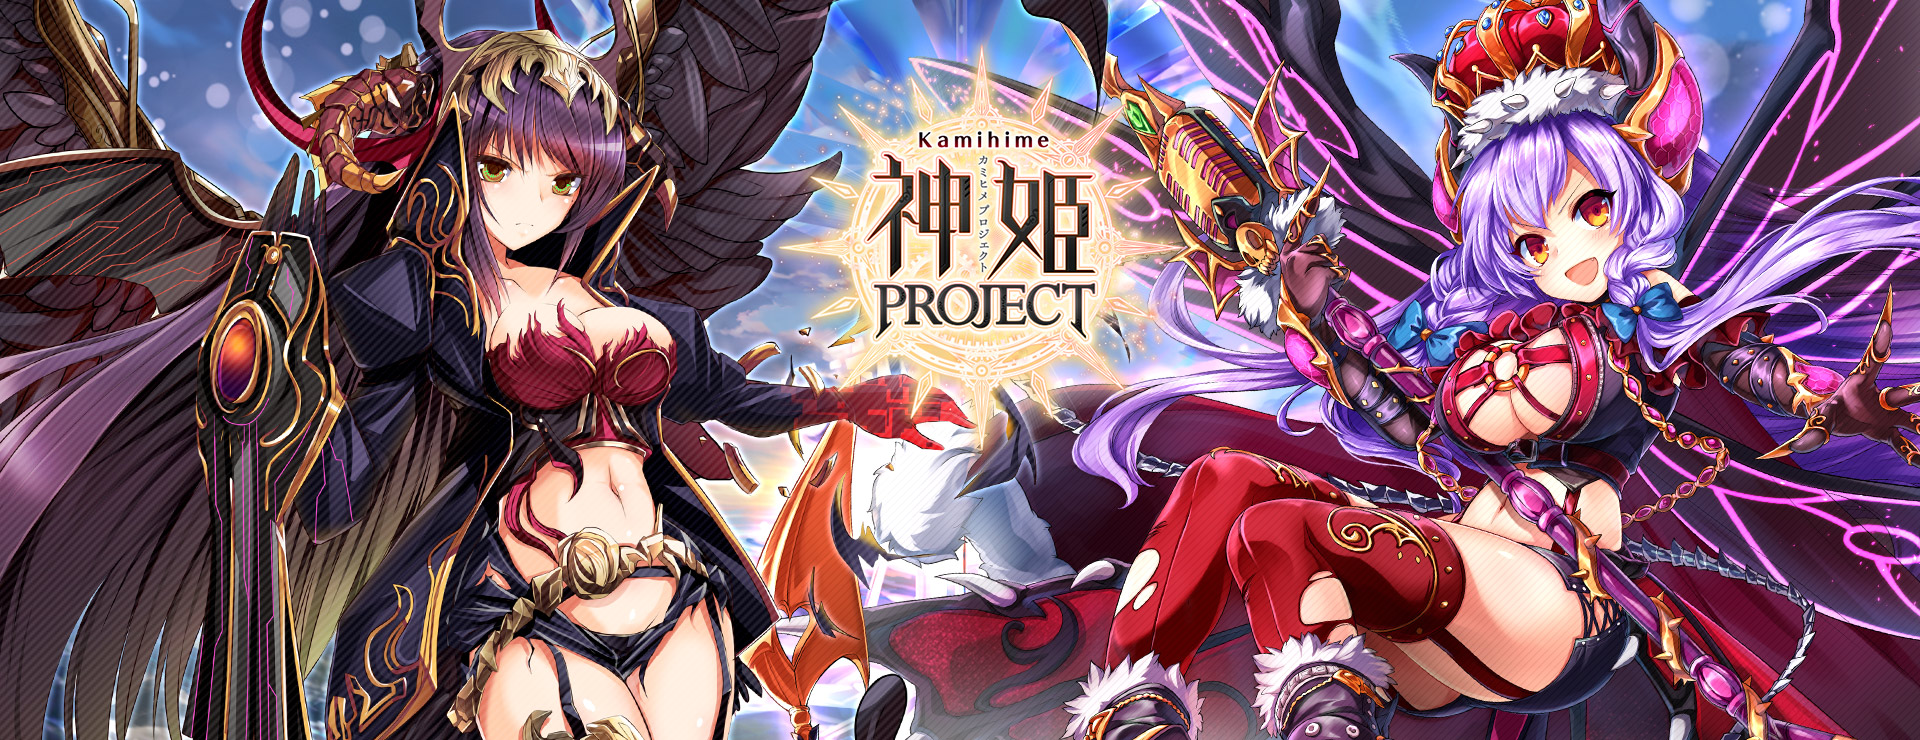 Kamihime PROJECT - ターン制RPG ゲーム